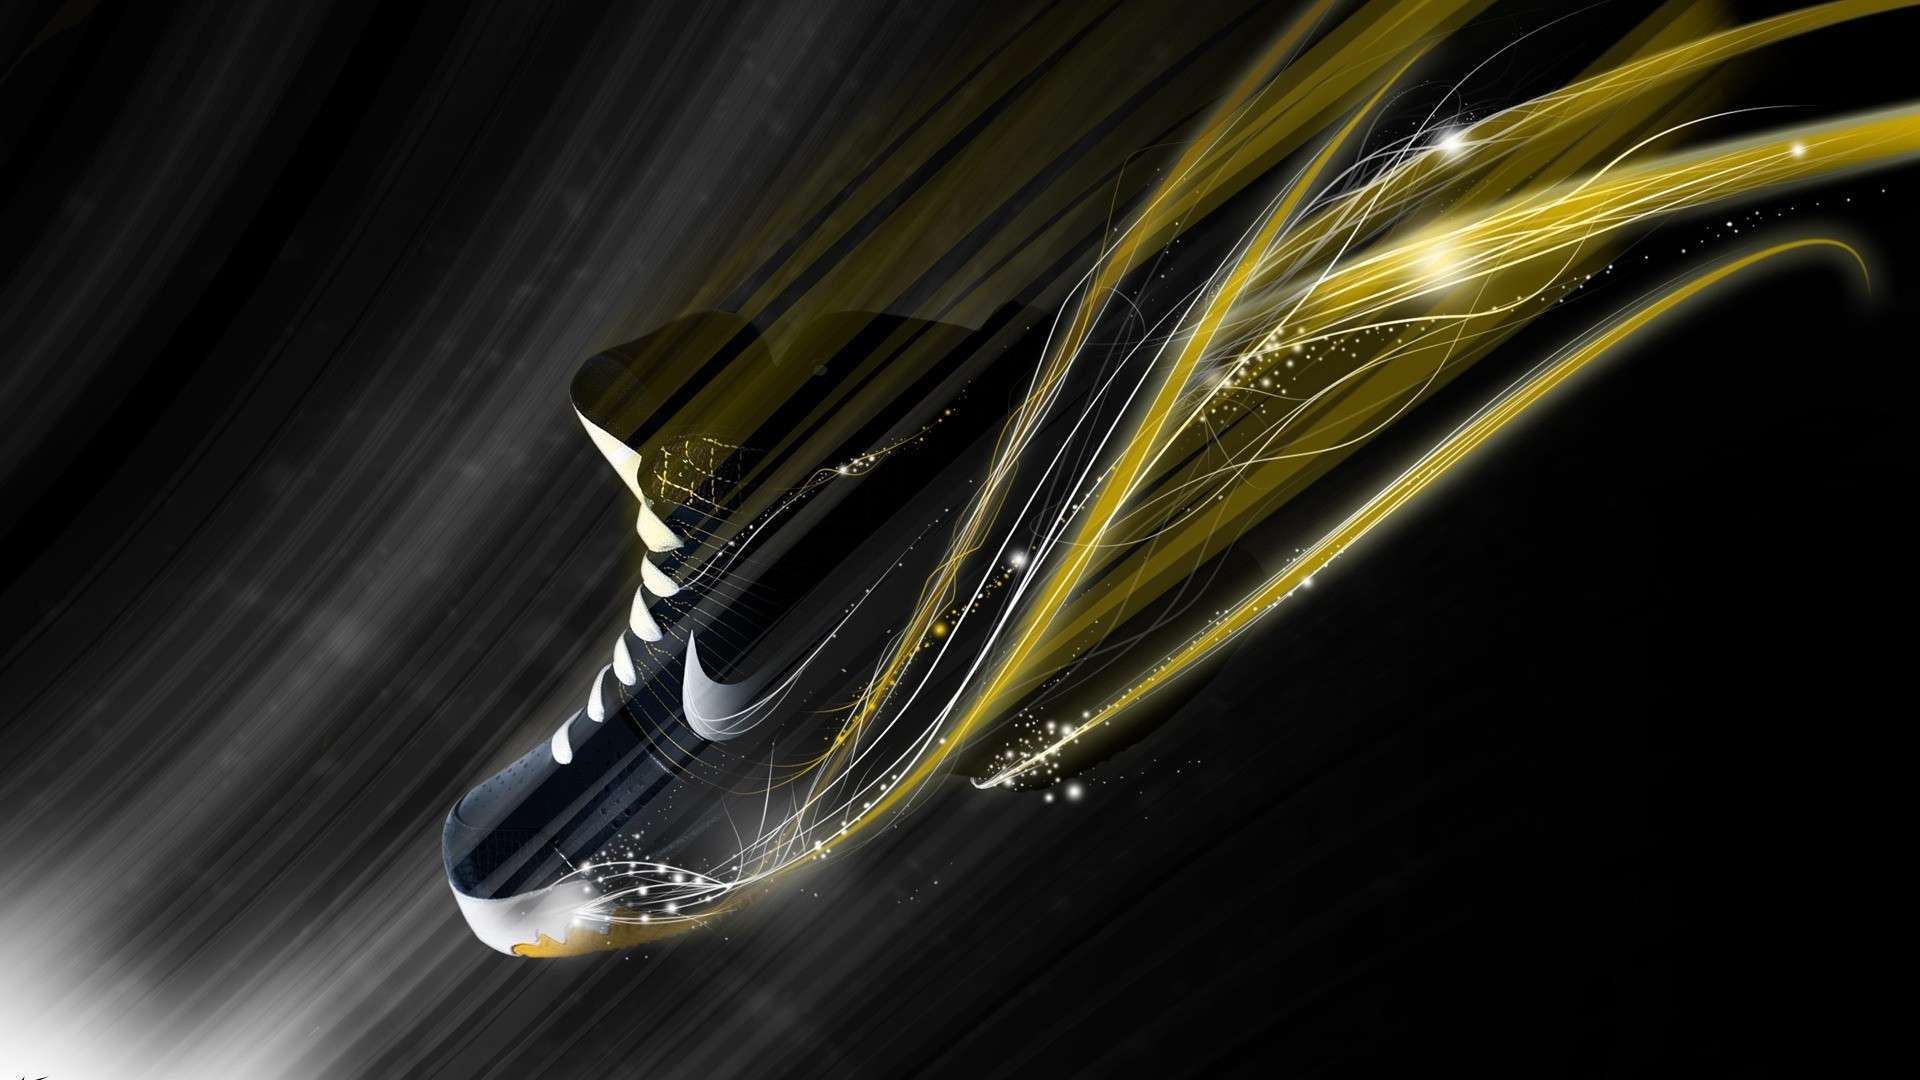 Awesome-Shoes-Nike-Sport-Wallpaper-download.jpg